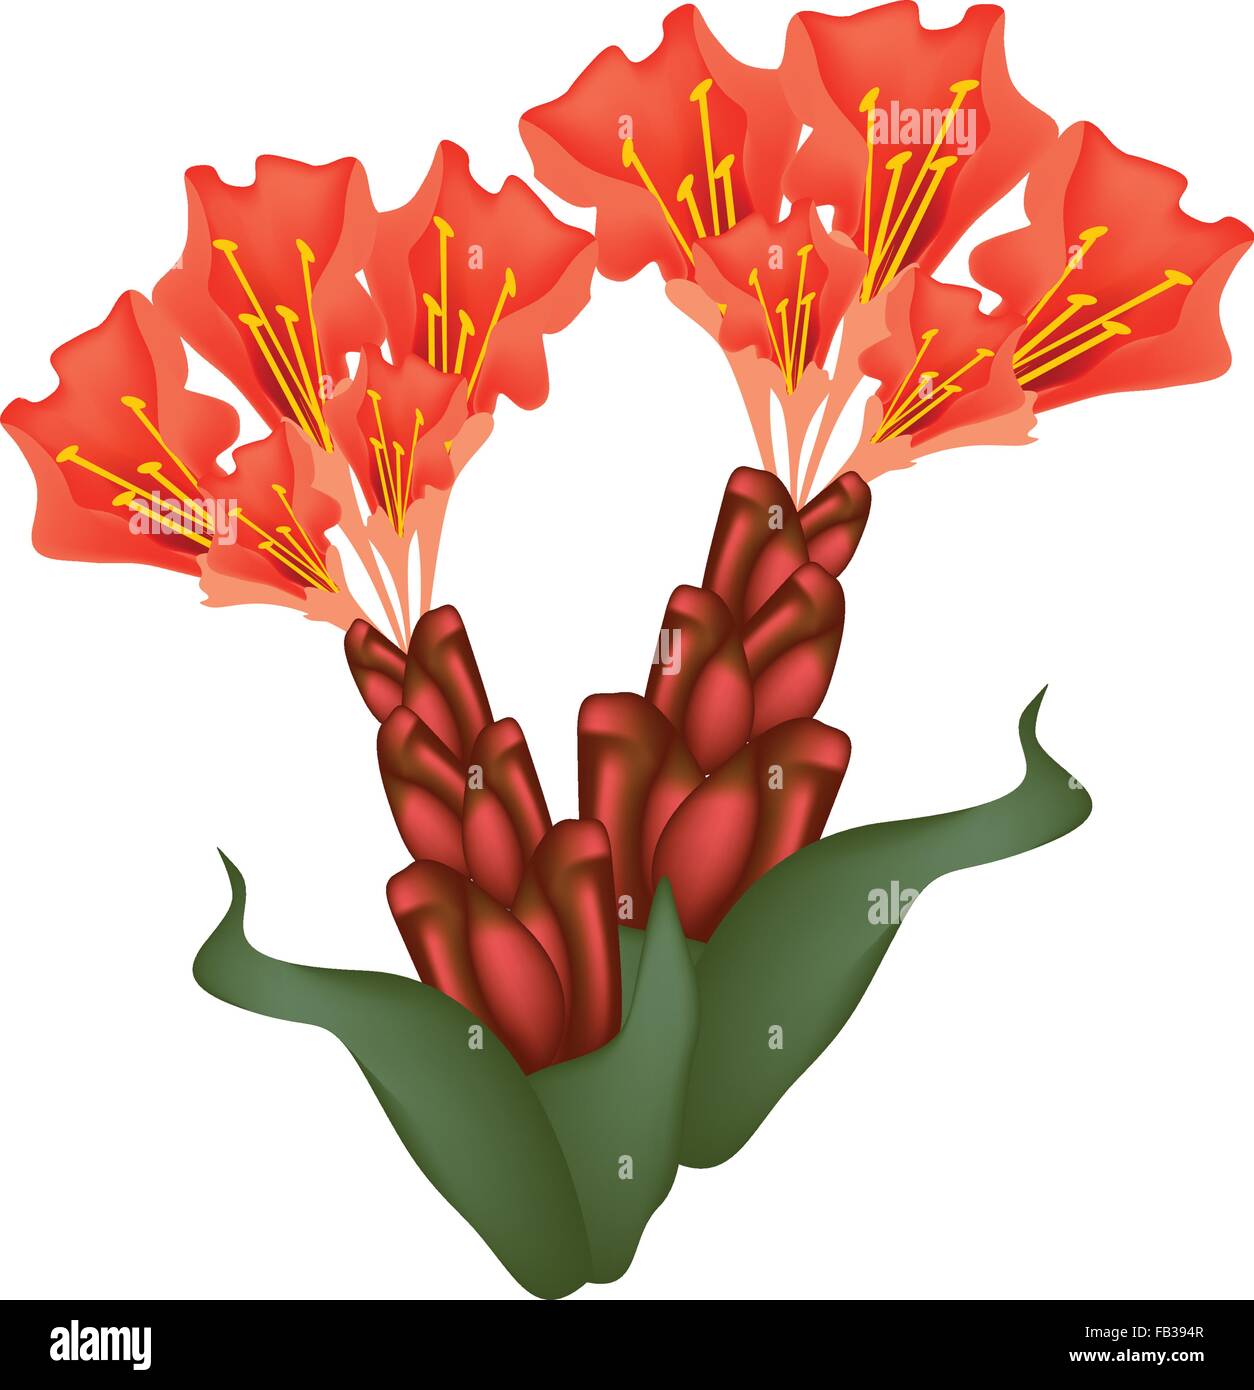 Beautiful Flower, Illustration of Rose of Venezuela, Scarlet Flame Bean or Brownea Ariza Flowers Isolated on Transparent Backgro Stock Vector